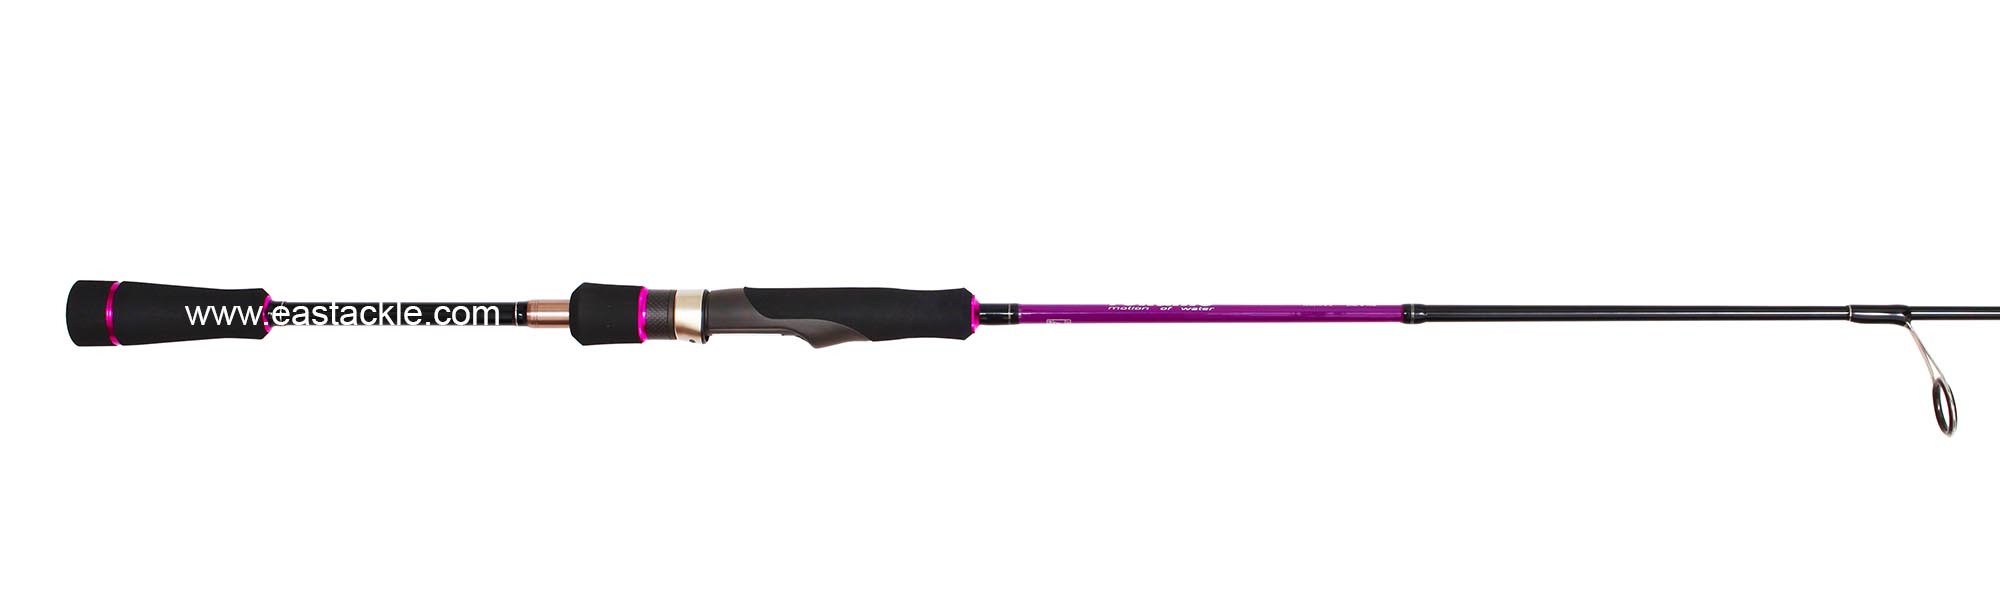 Rapala - Vallemo - VMS632M - Spinning Rod - Butt to Stripper Guide (Side View) | Eastackle